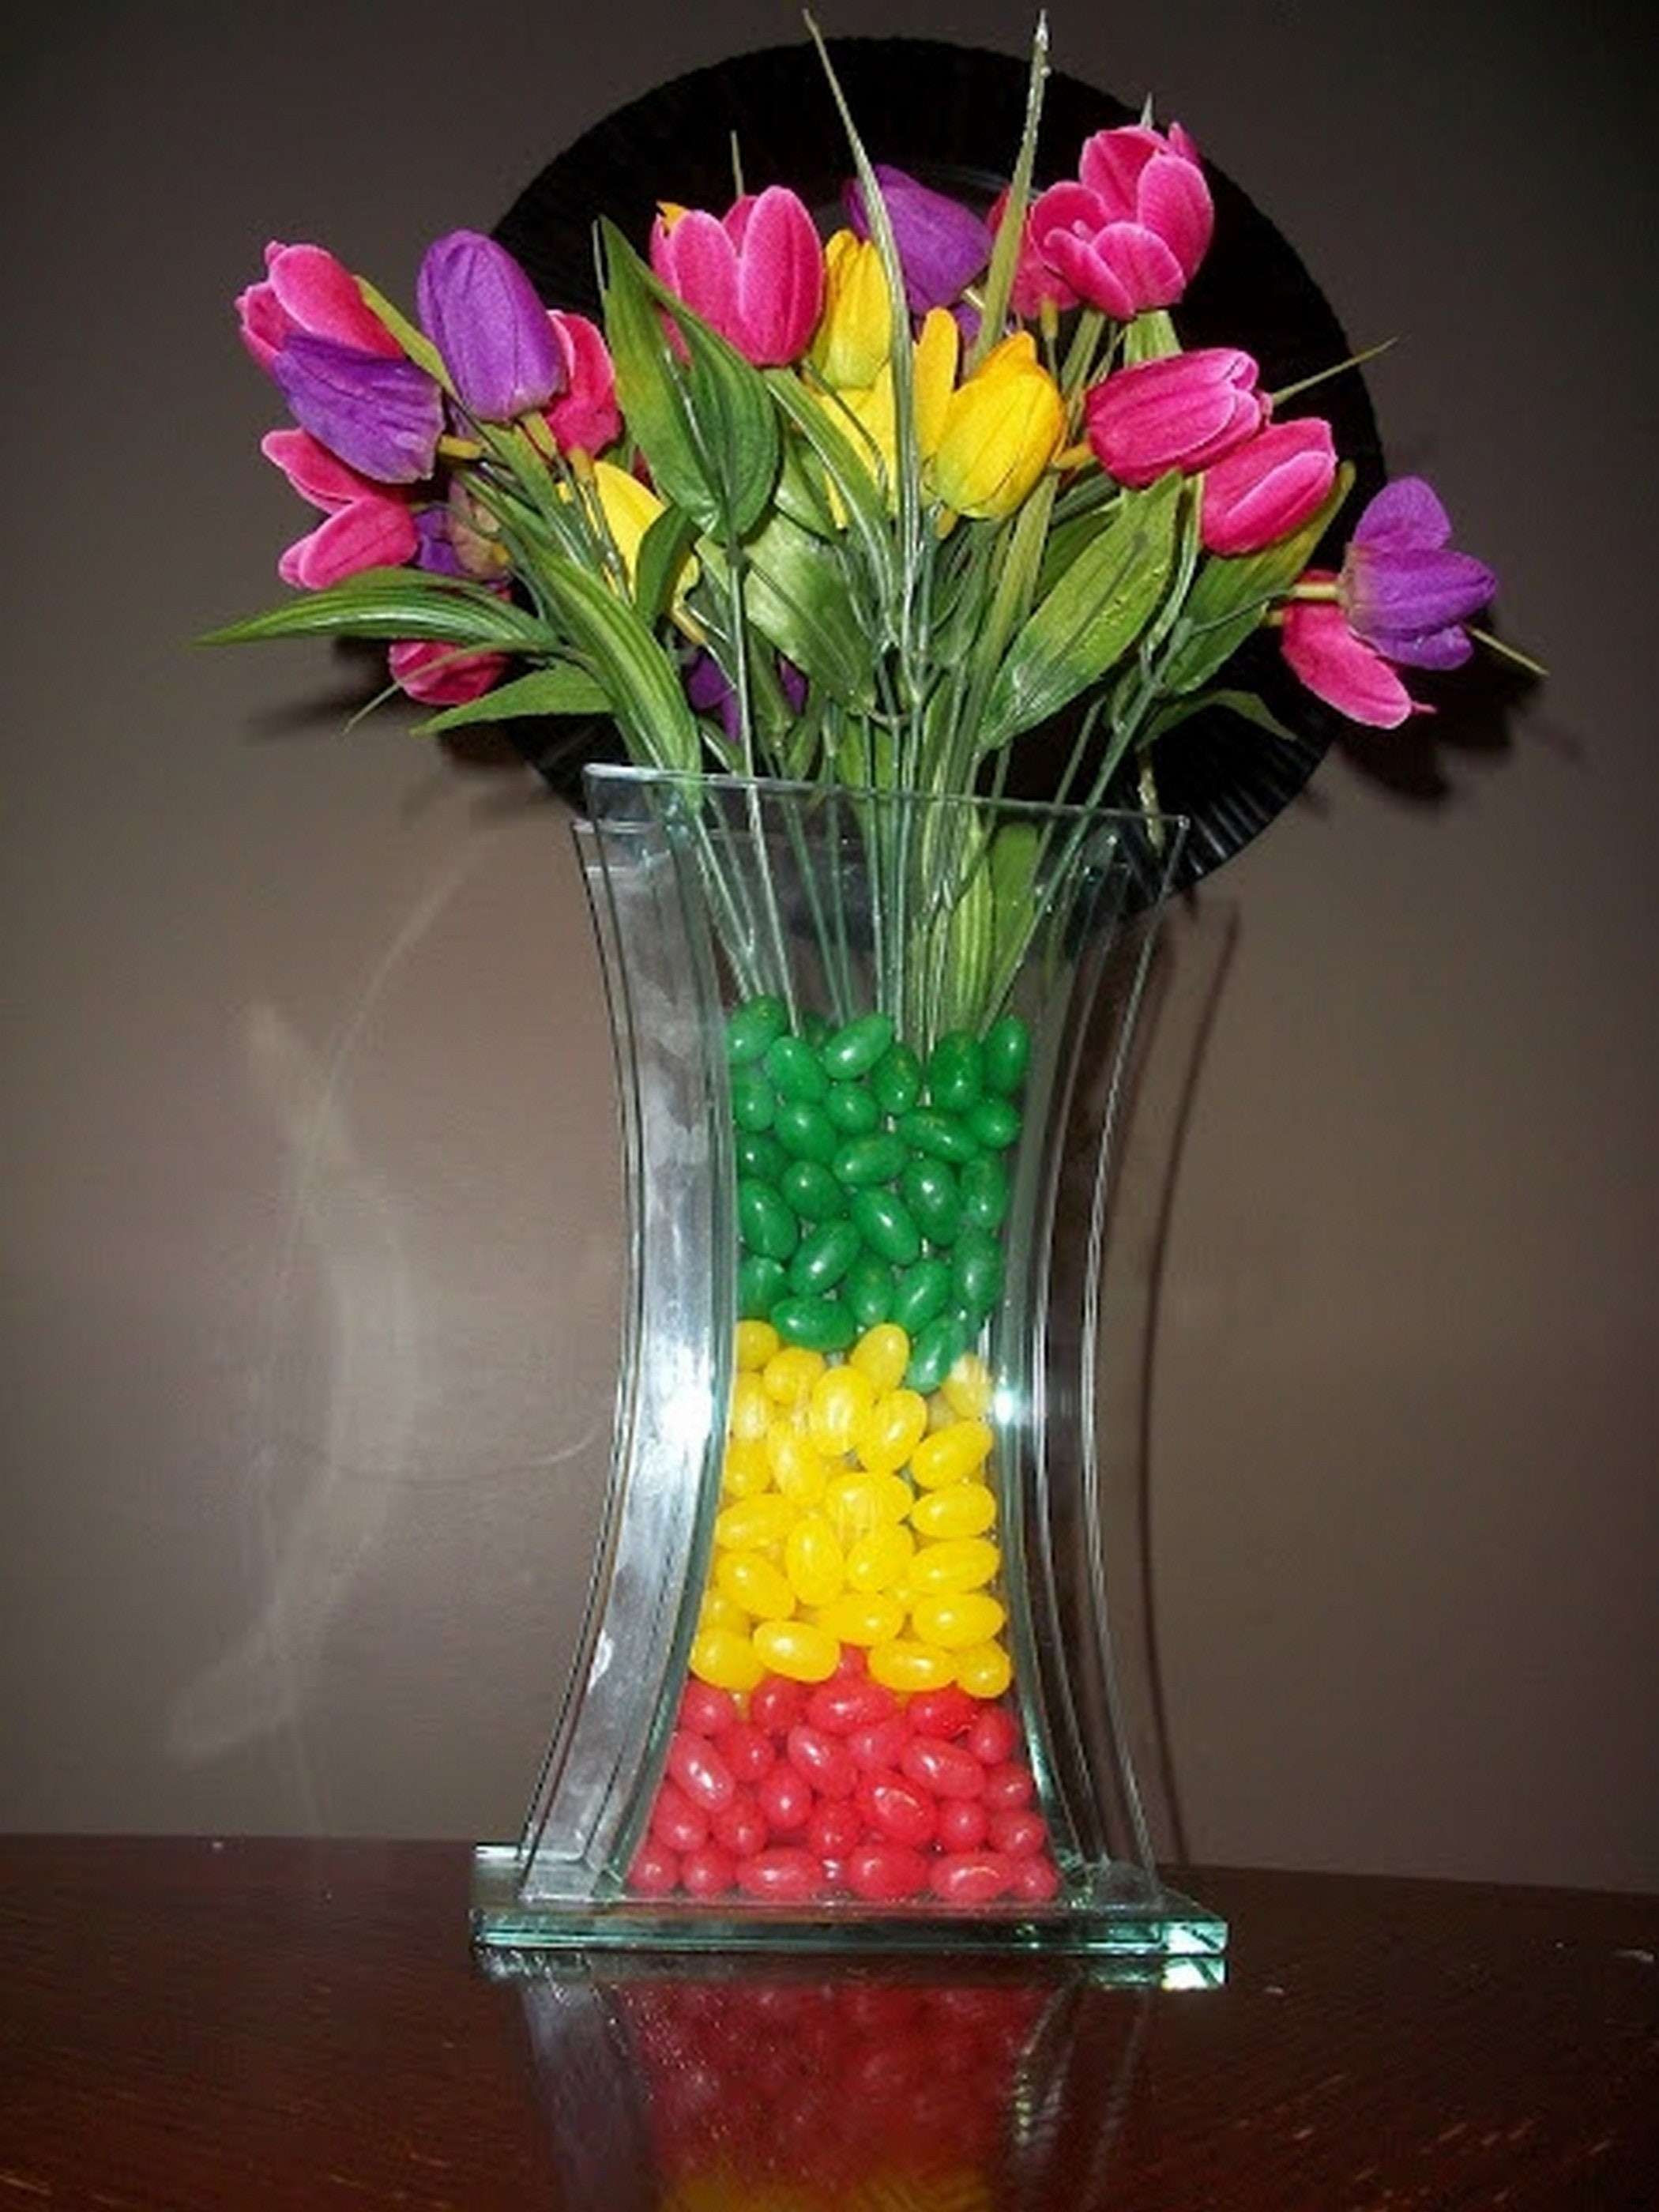 12 Recommended Flower Arrangements In Clear Vases 2024 free download flower arrangements in clear vases of green glass vase elegant 15 cheap and easy diy vase filler ideas 3h in green glass vase elegant 15 cheap and easy diy vase filler ideas 3h vases flower 